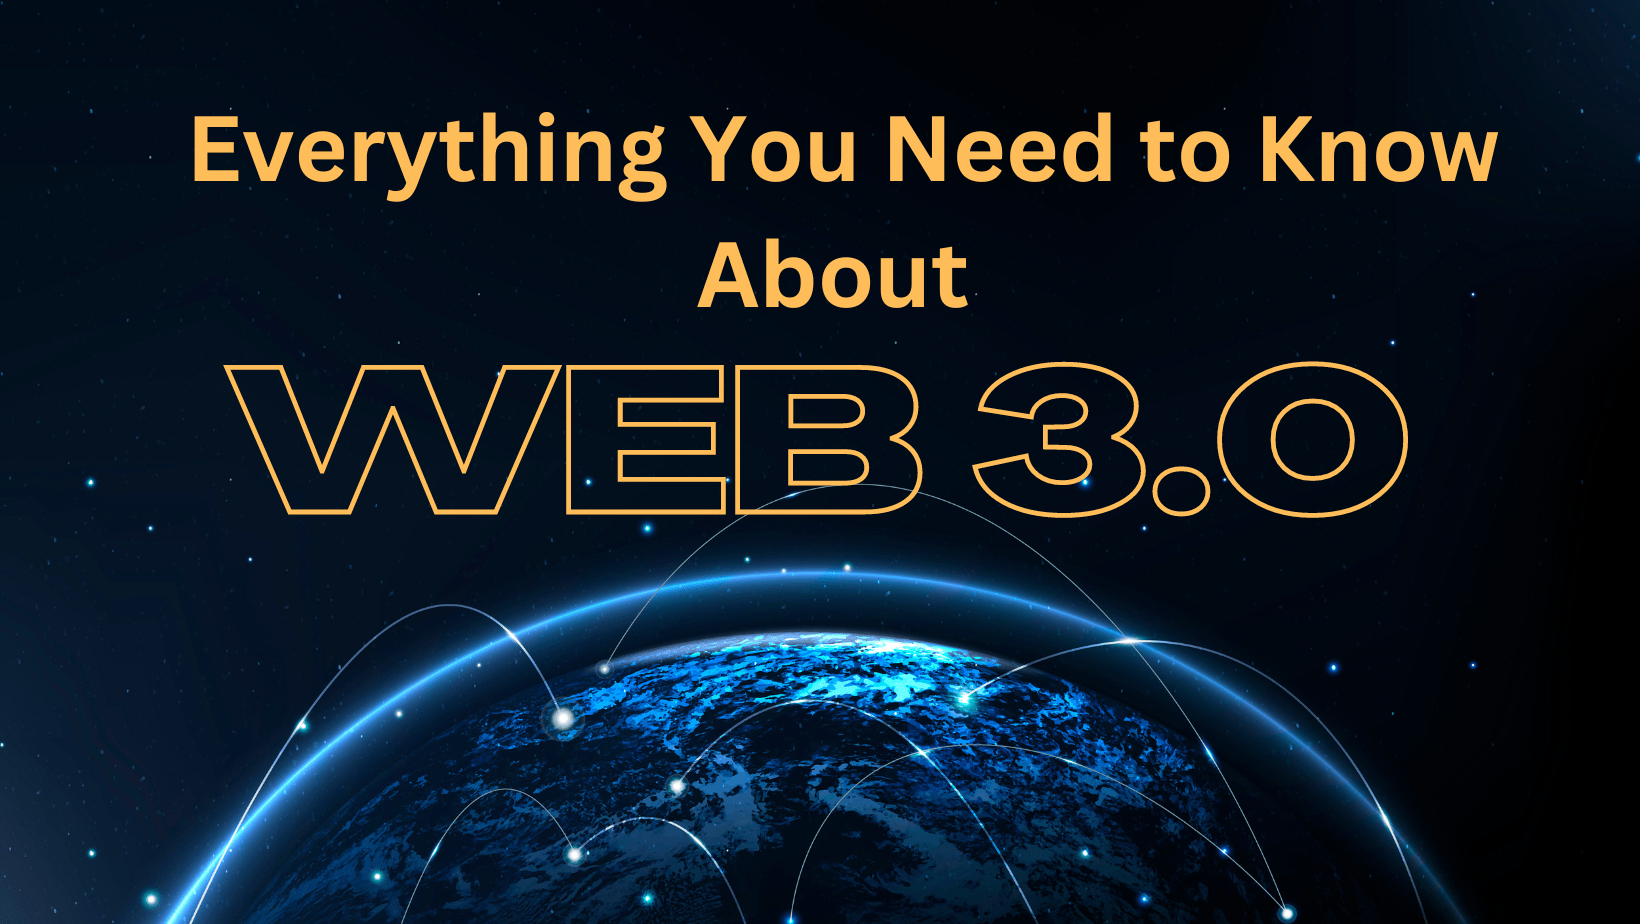 Everything You Need to Know About Web 3.0